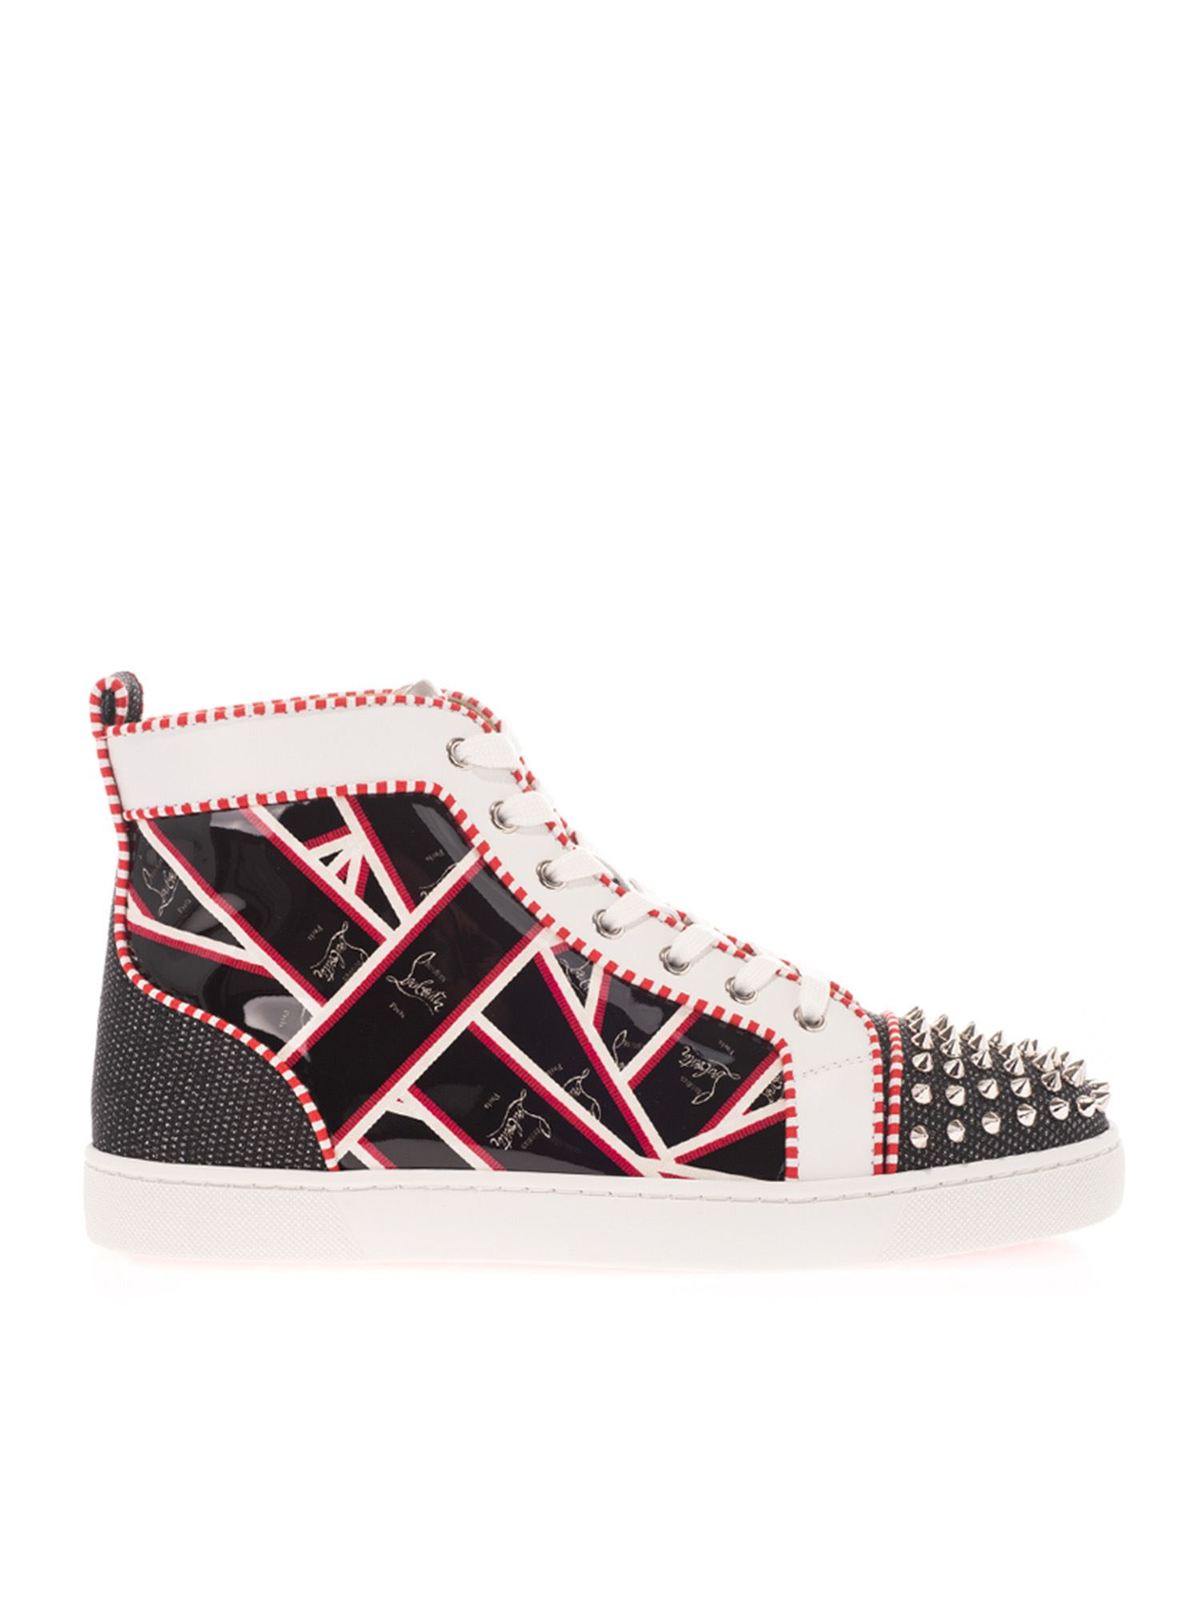 Louis Spikes Sneakers in Black - Christian Louboutin